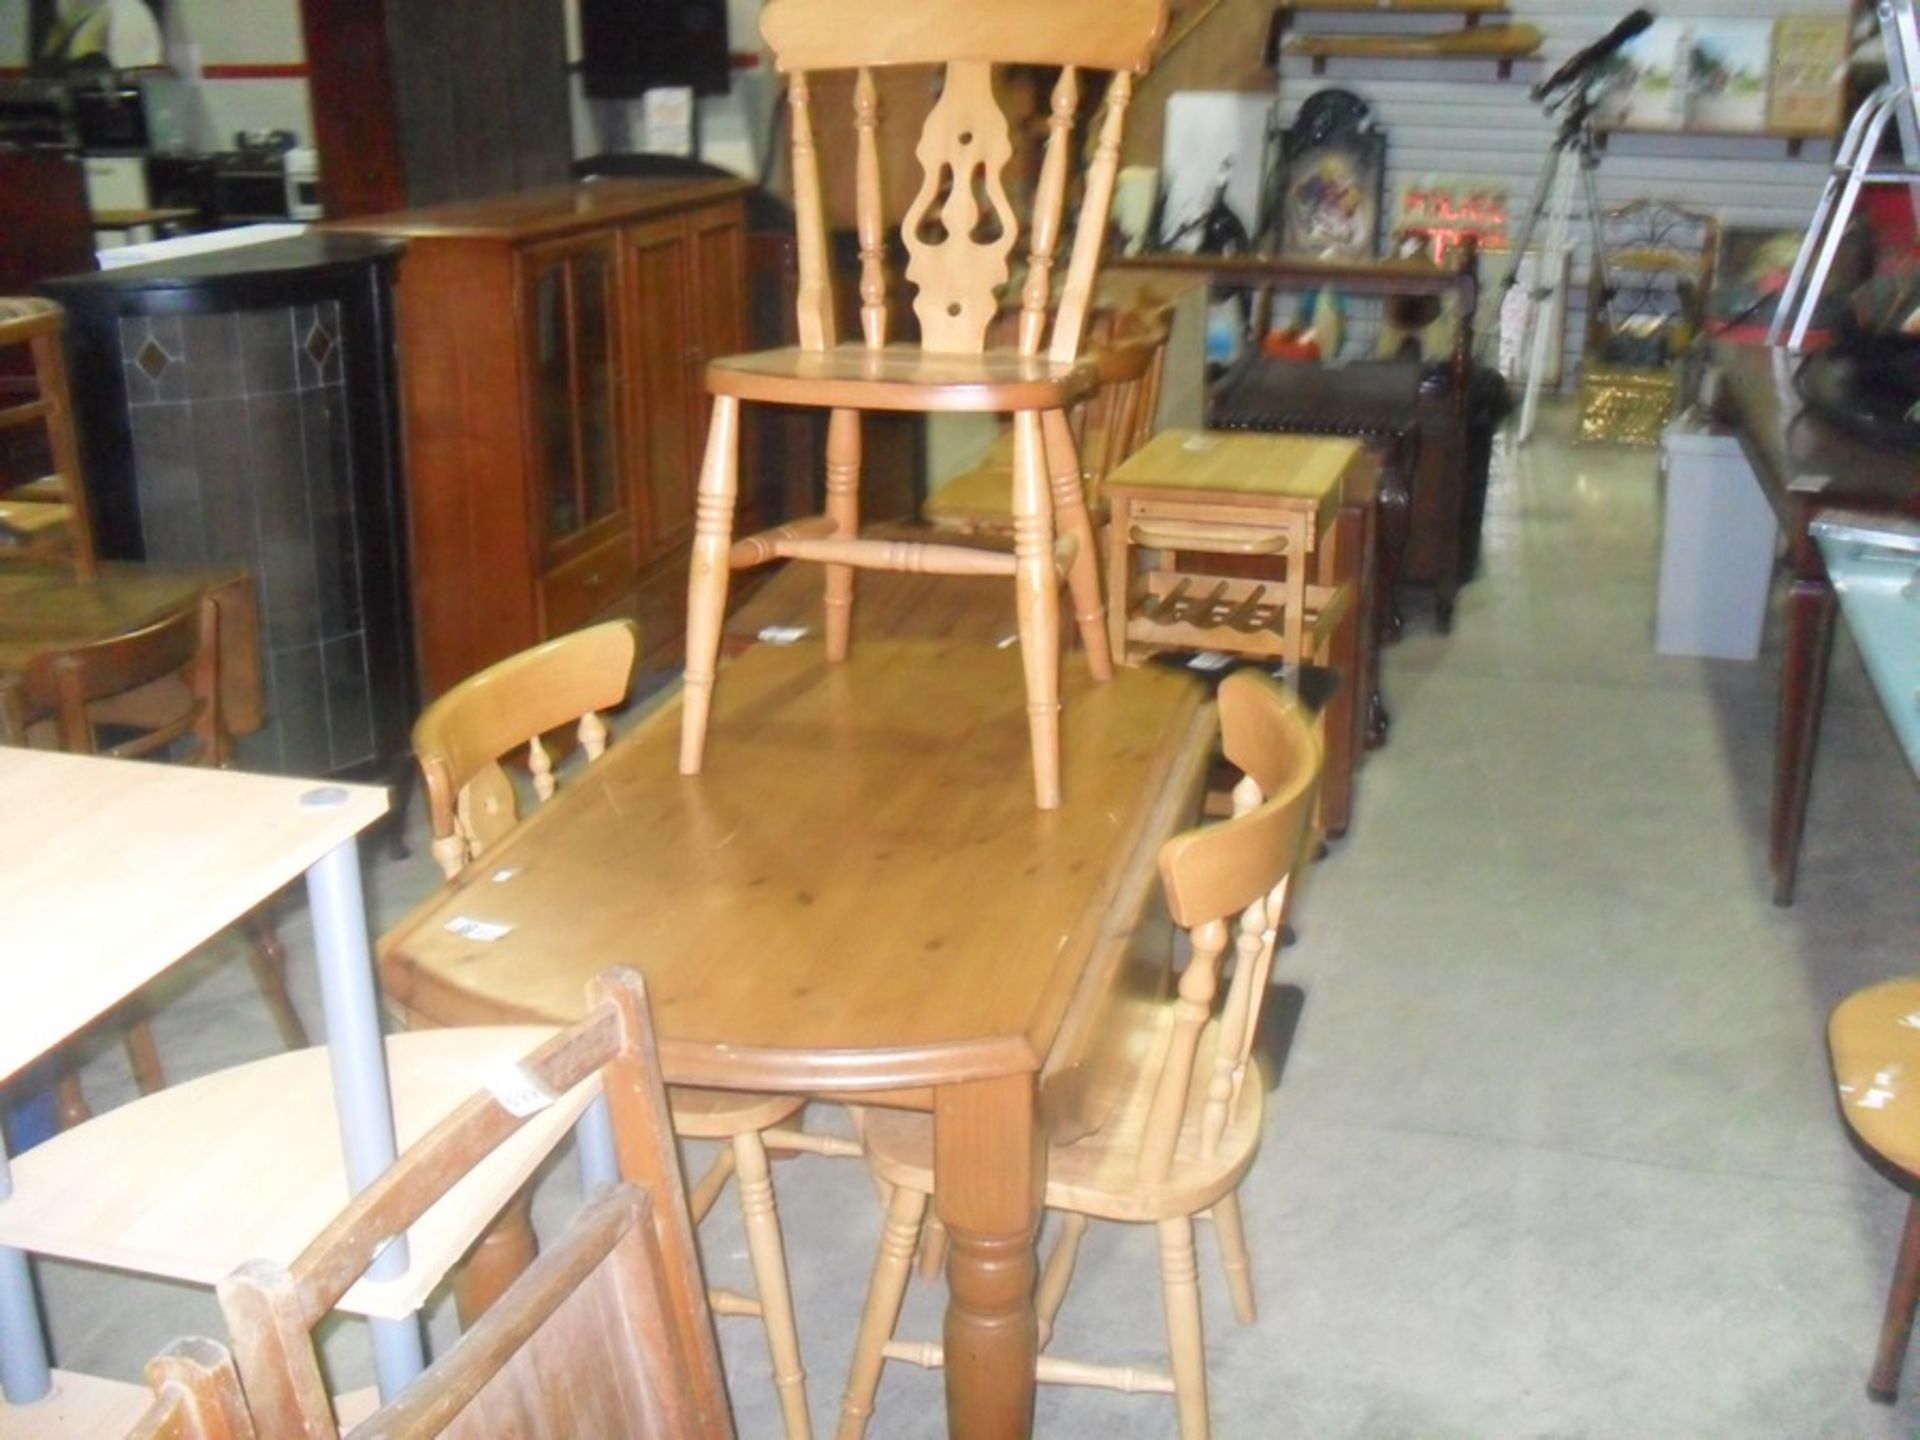 PINE TABLE AND 3 CHAIRS